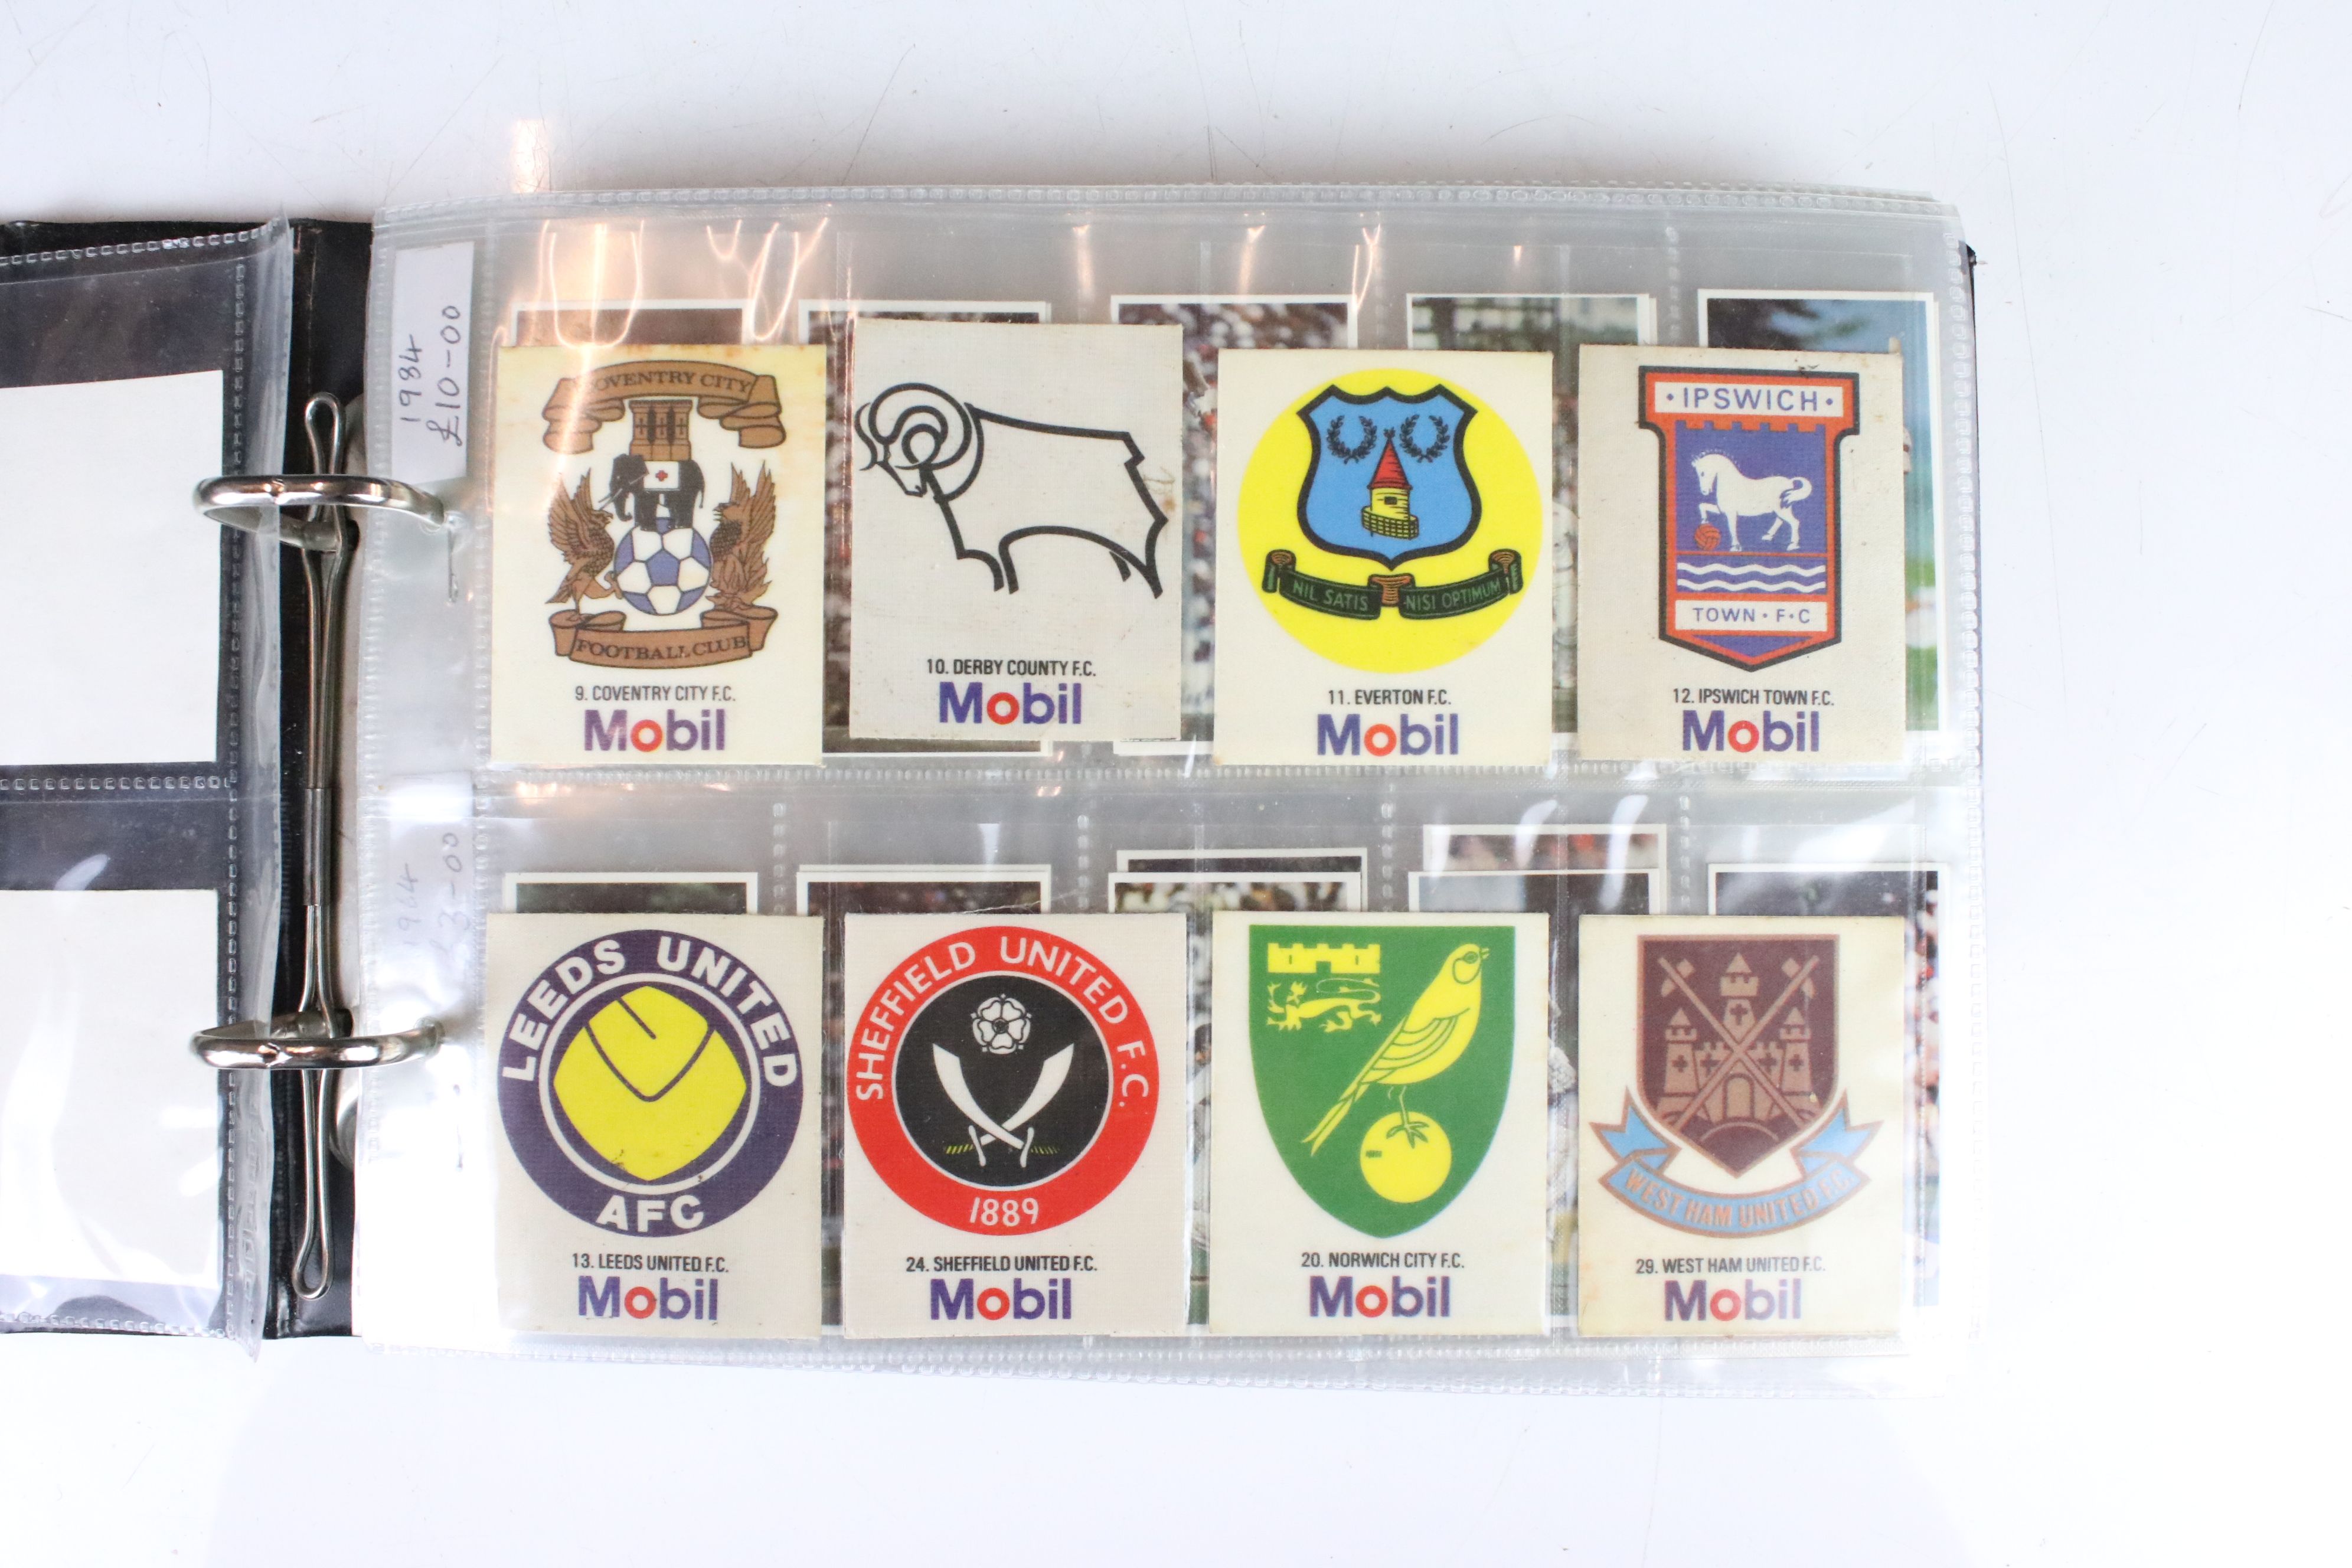 Three Albums of Cigarette Cards, Trade Cards and Tea Cards including Eight Mobil Football Club Badge - Image 11 of 17